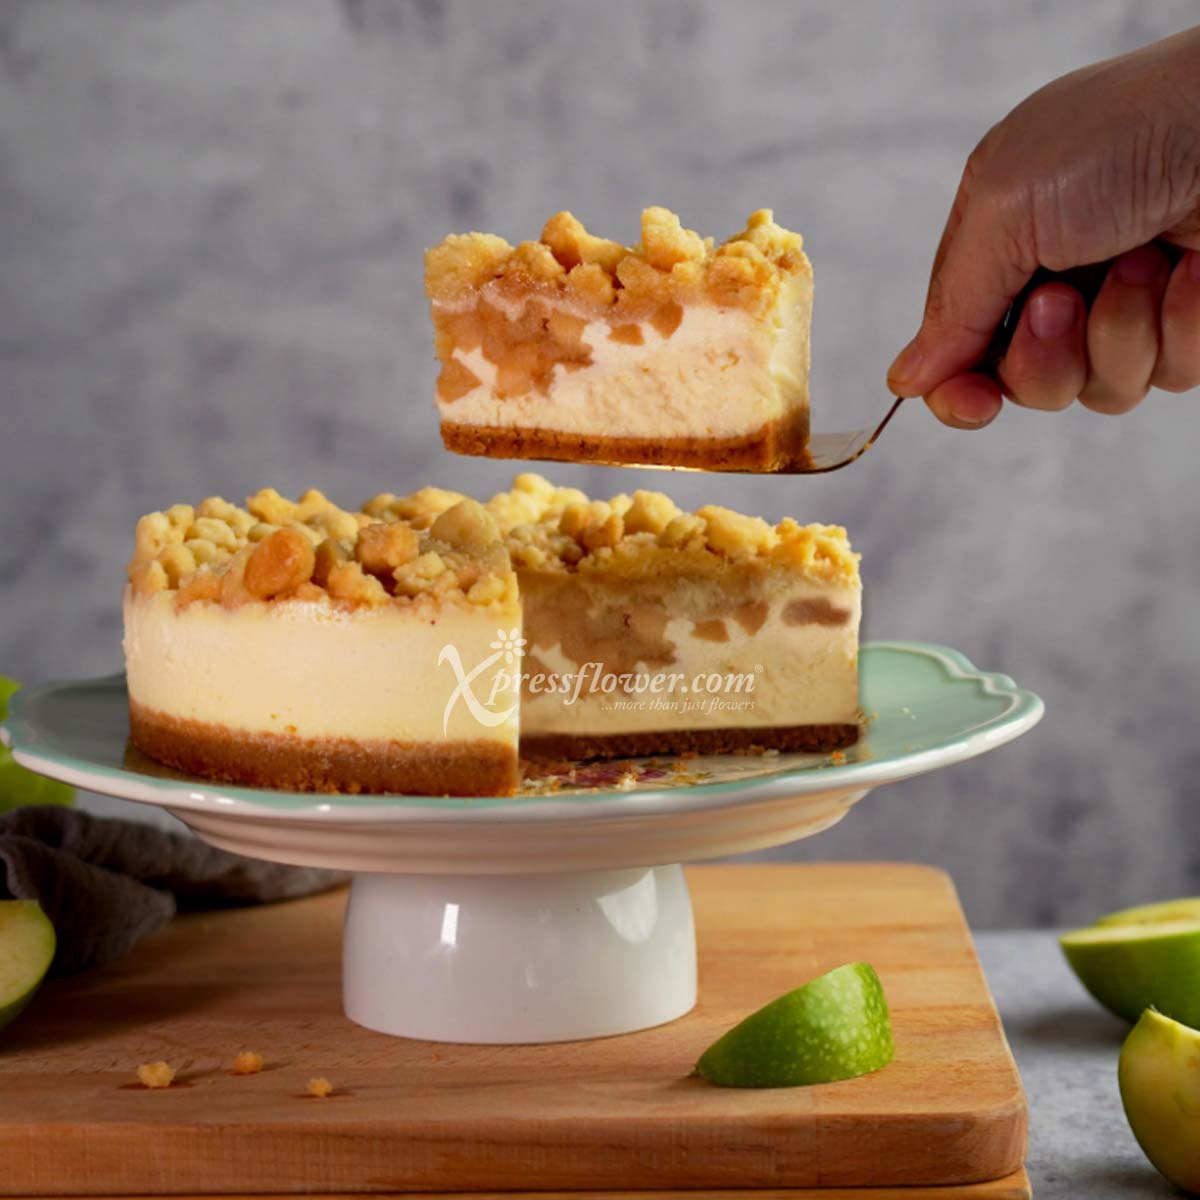 CFC2306 Apple of My Eye Apple Crumble Cheesecake (Cat & The Fiddle) 1c